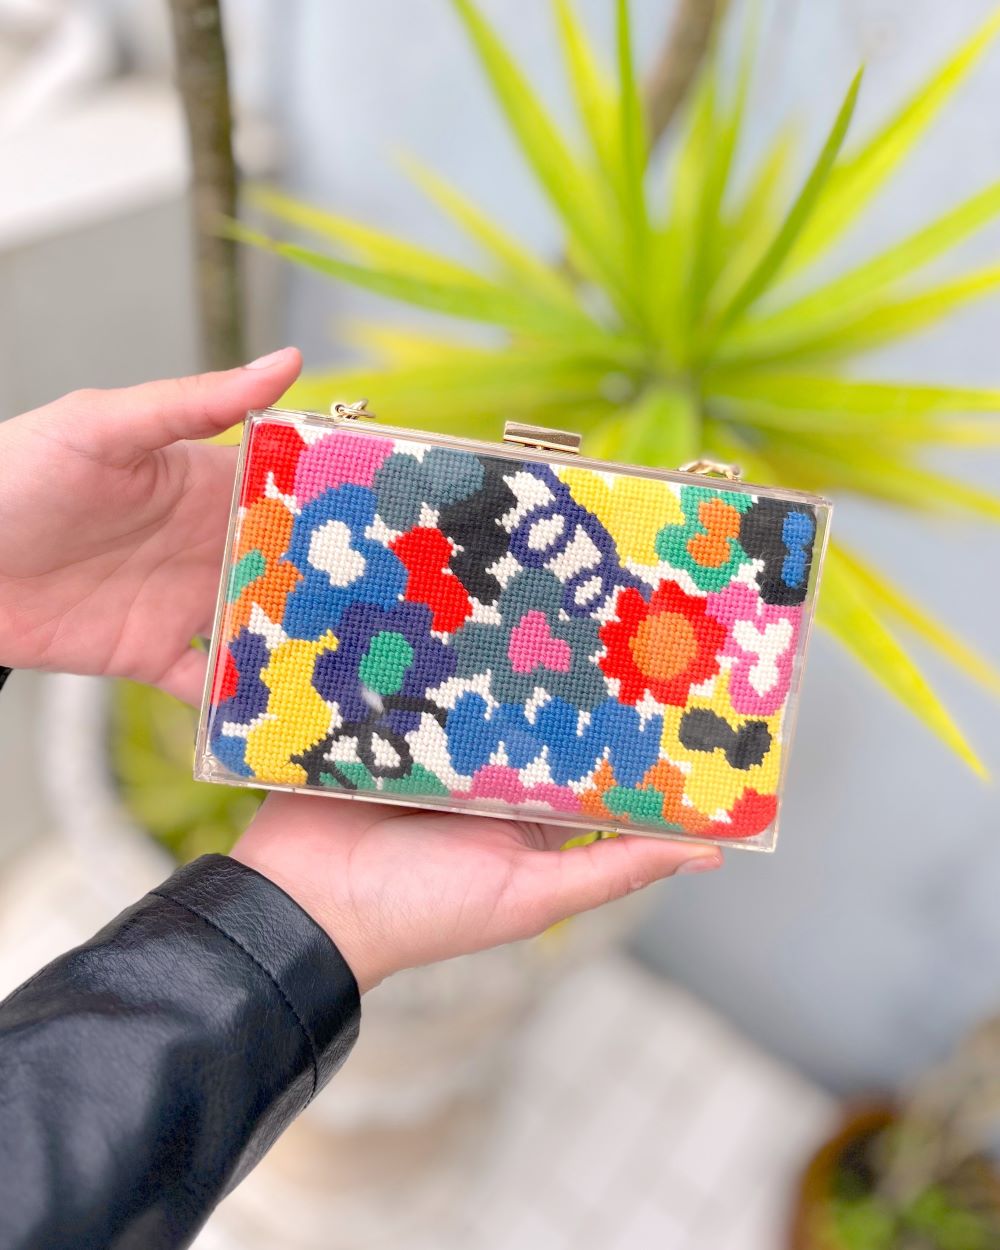 Jungley Flowers Needlepoint Kit for Clutch Insert/Phone Holder by Unwind Studio